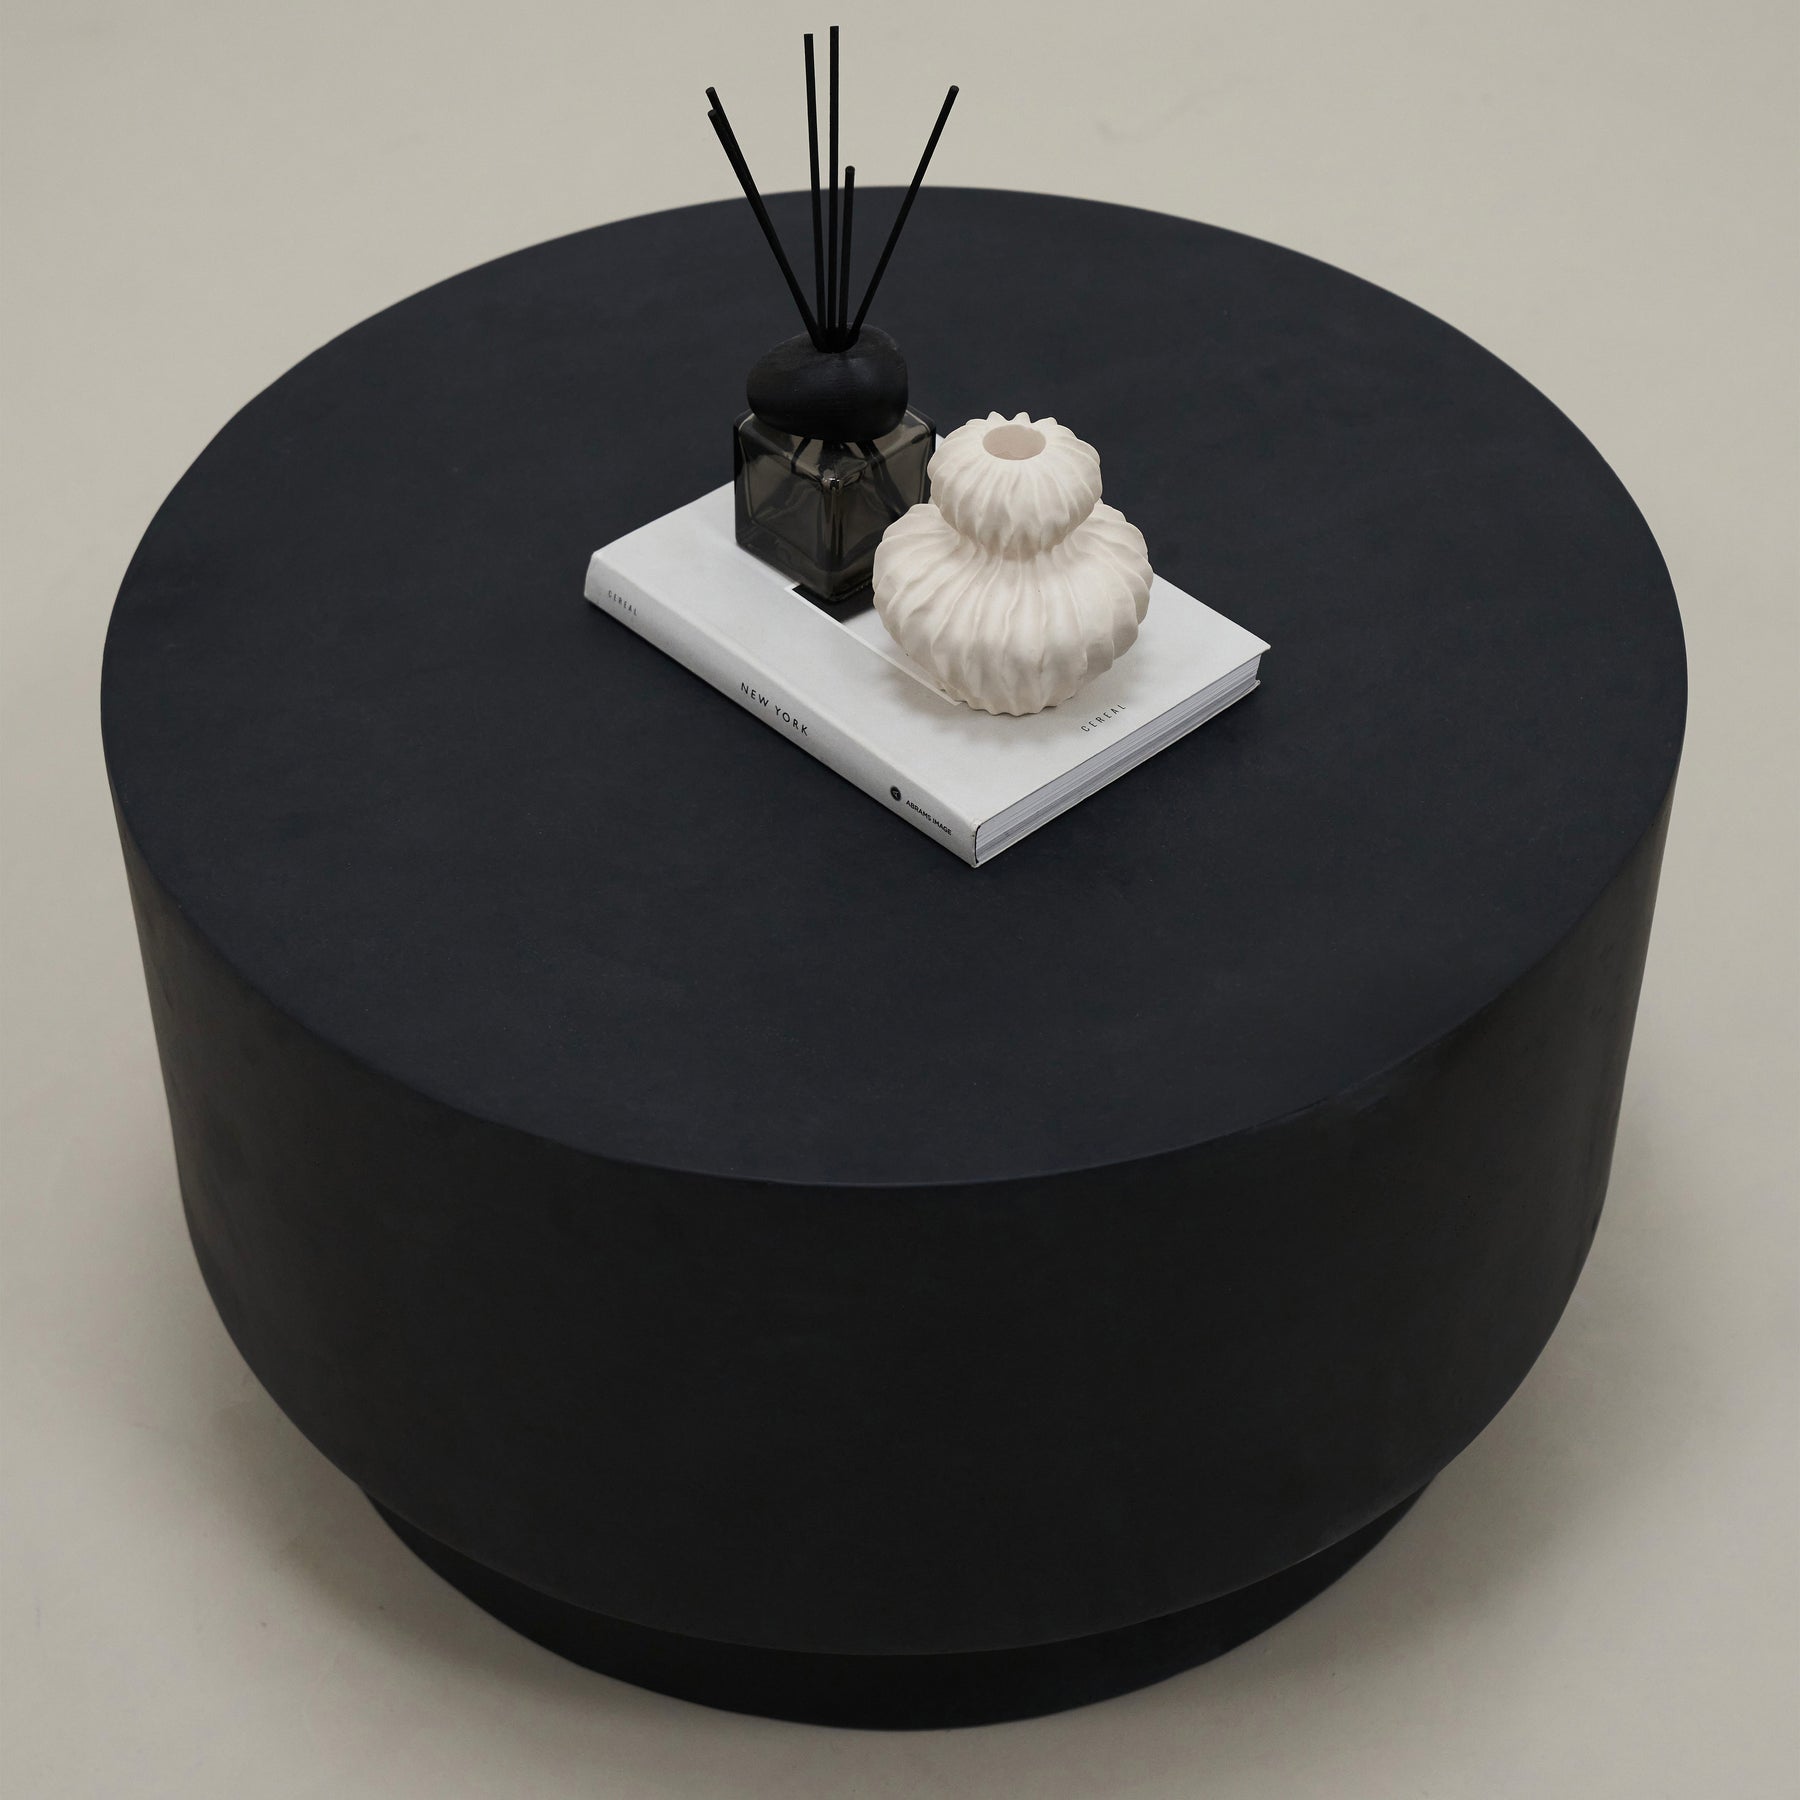 Minimal onyx round coffee table adorned with book, incense, and ceramics